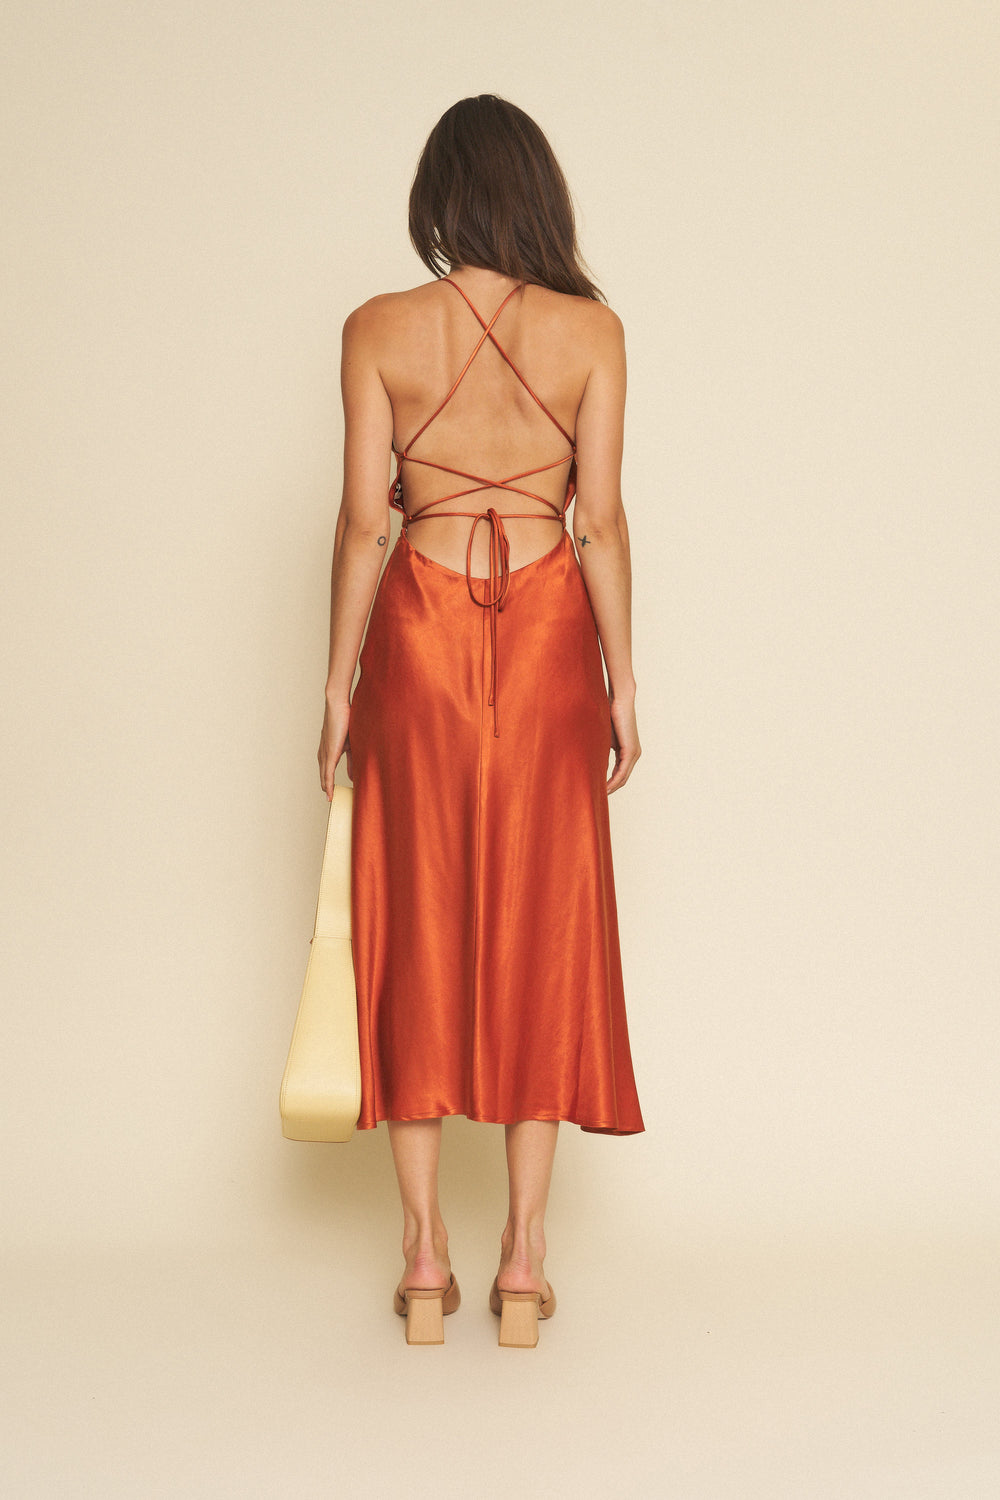 Camille Dress in Rust - Whimsy & Row